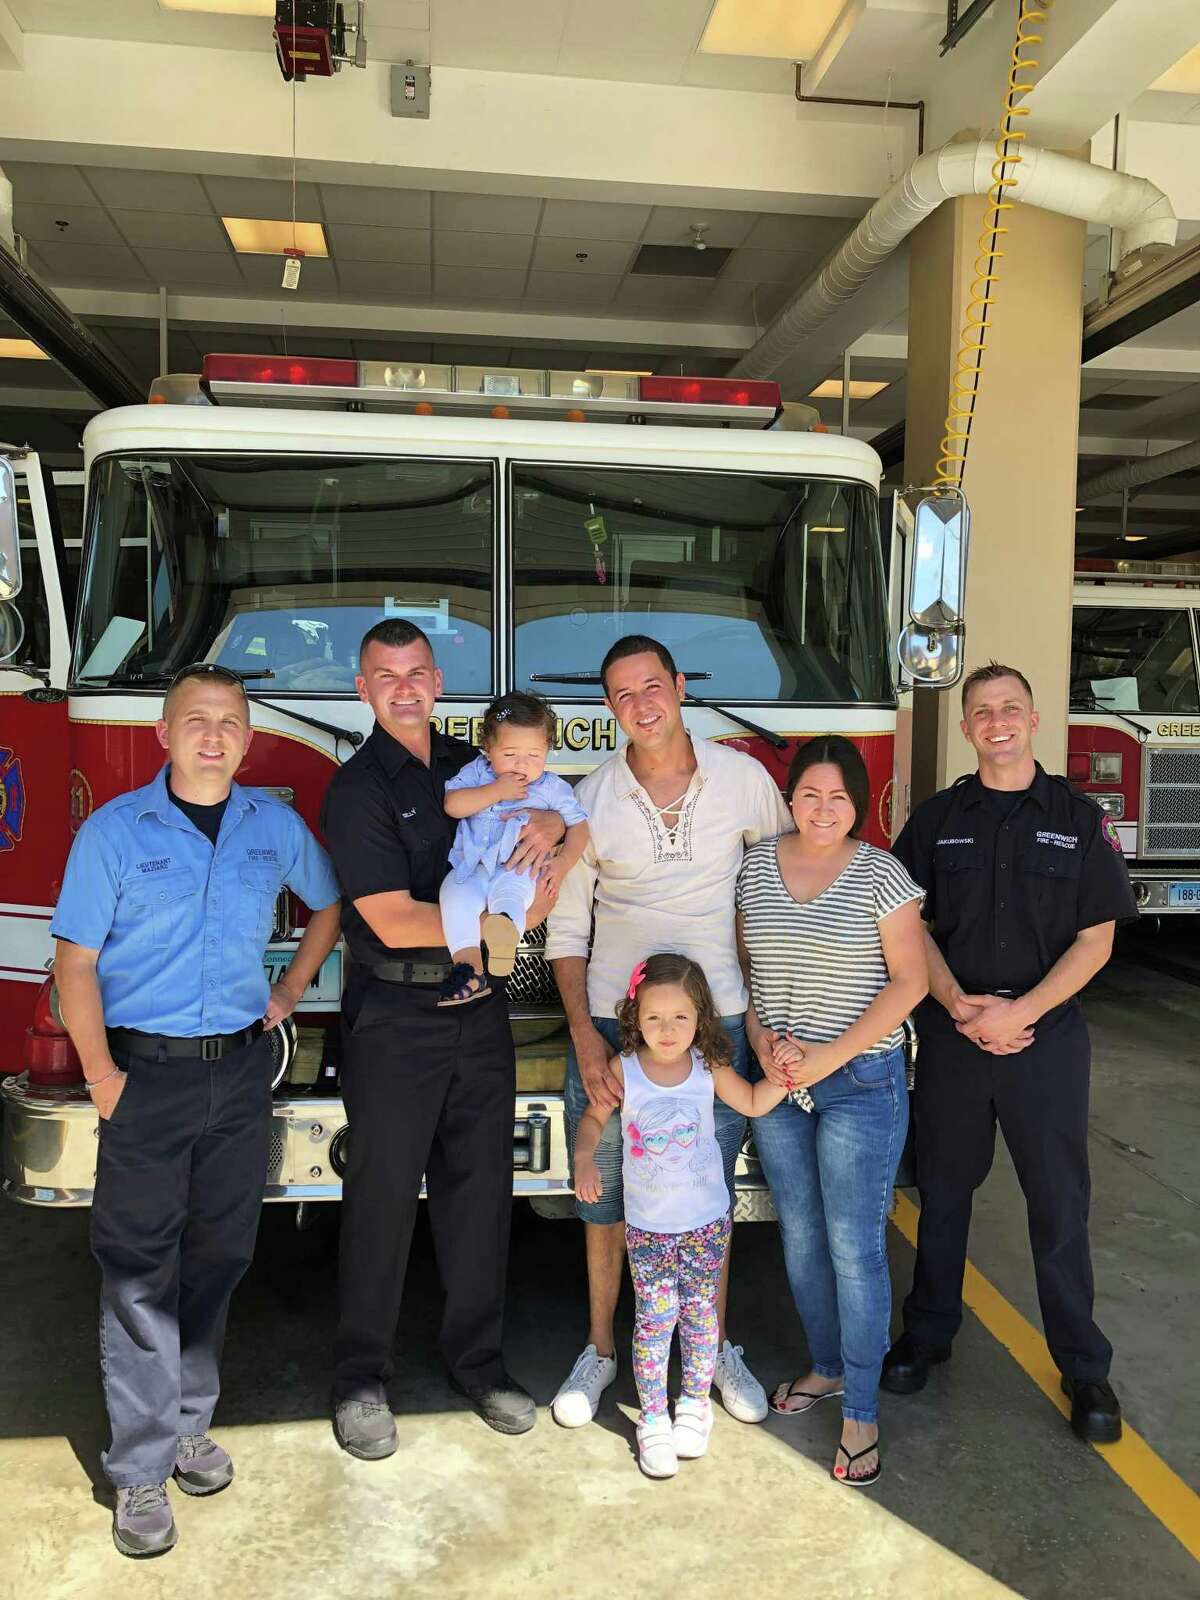 Erik Maziarz, Chris Kelly, Sophia Rincon, Juan Rincon, Luciana Rincon, aged 4, Luc Rincon and Adam Jakubowski meet at the downtown fire station Thursday. The firefighters helped revive the infant on Aug. 13, and her family came by to offer thanks.